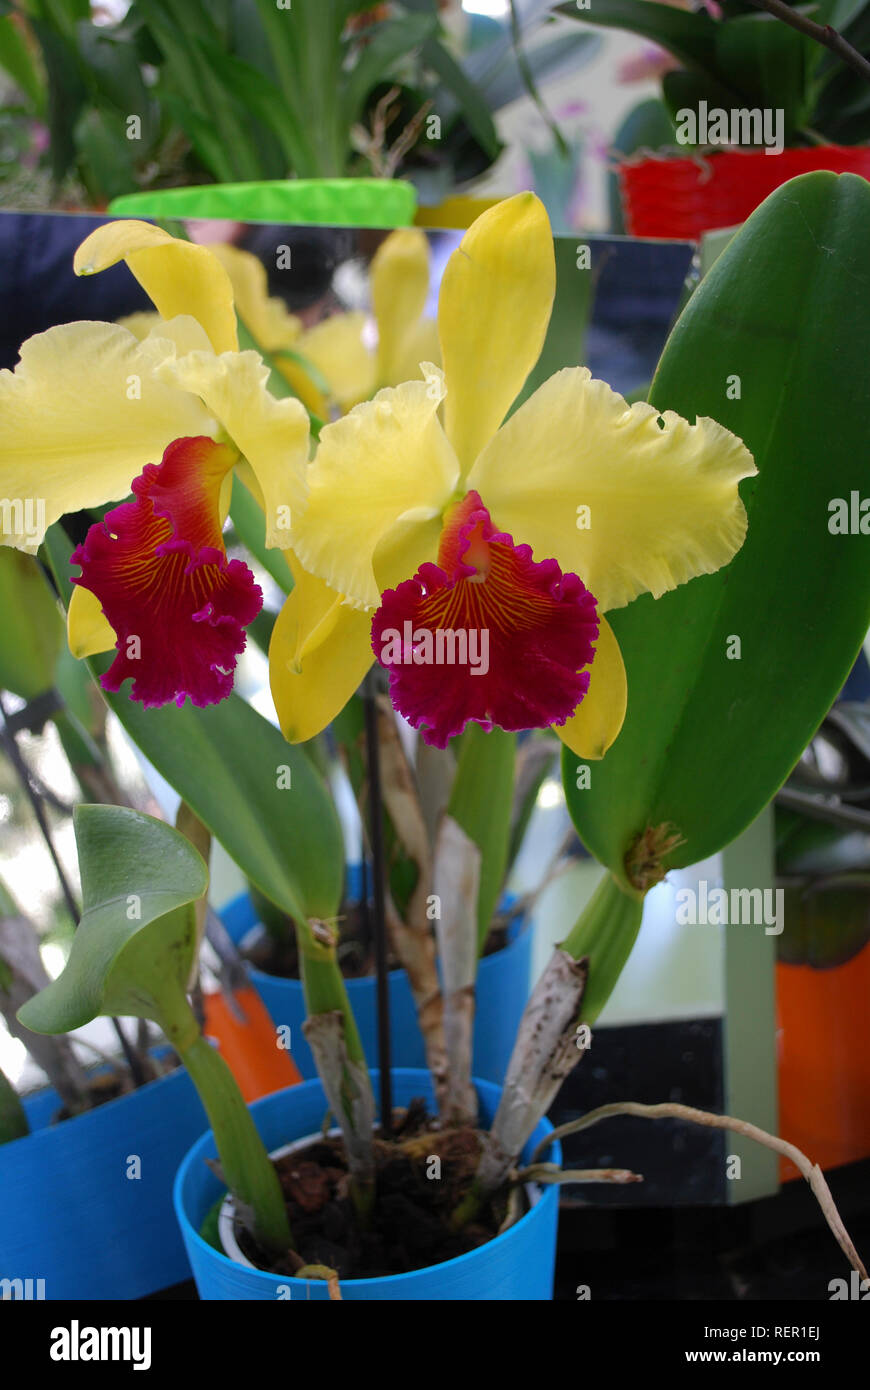 Cattleya dowiana flowers. Decorative plants for gardening and greenhouse. Stock Photo